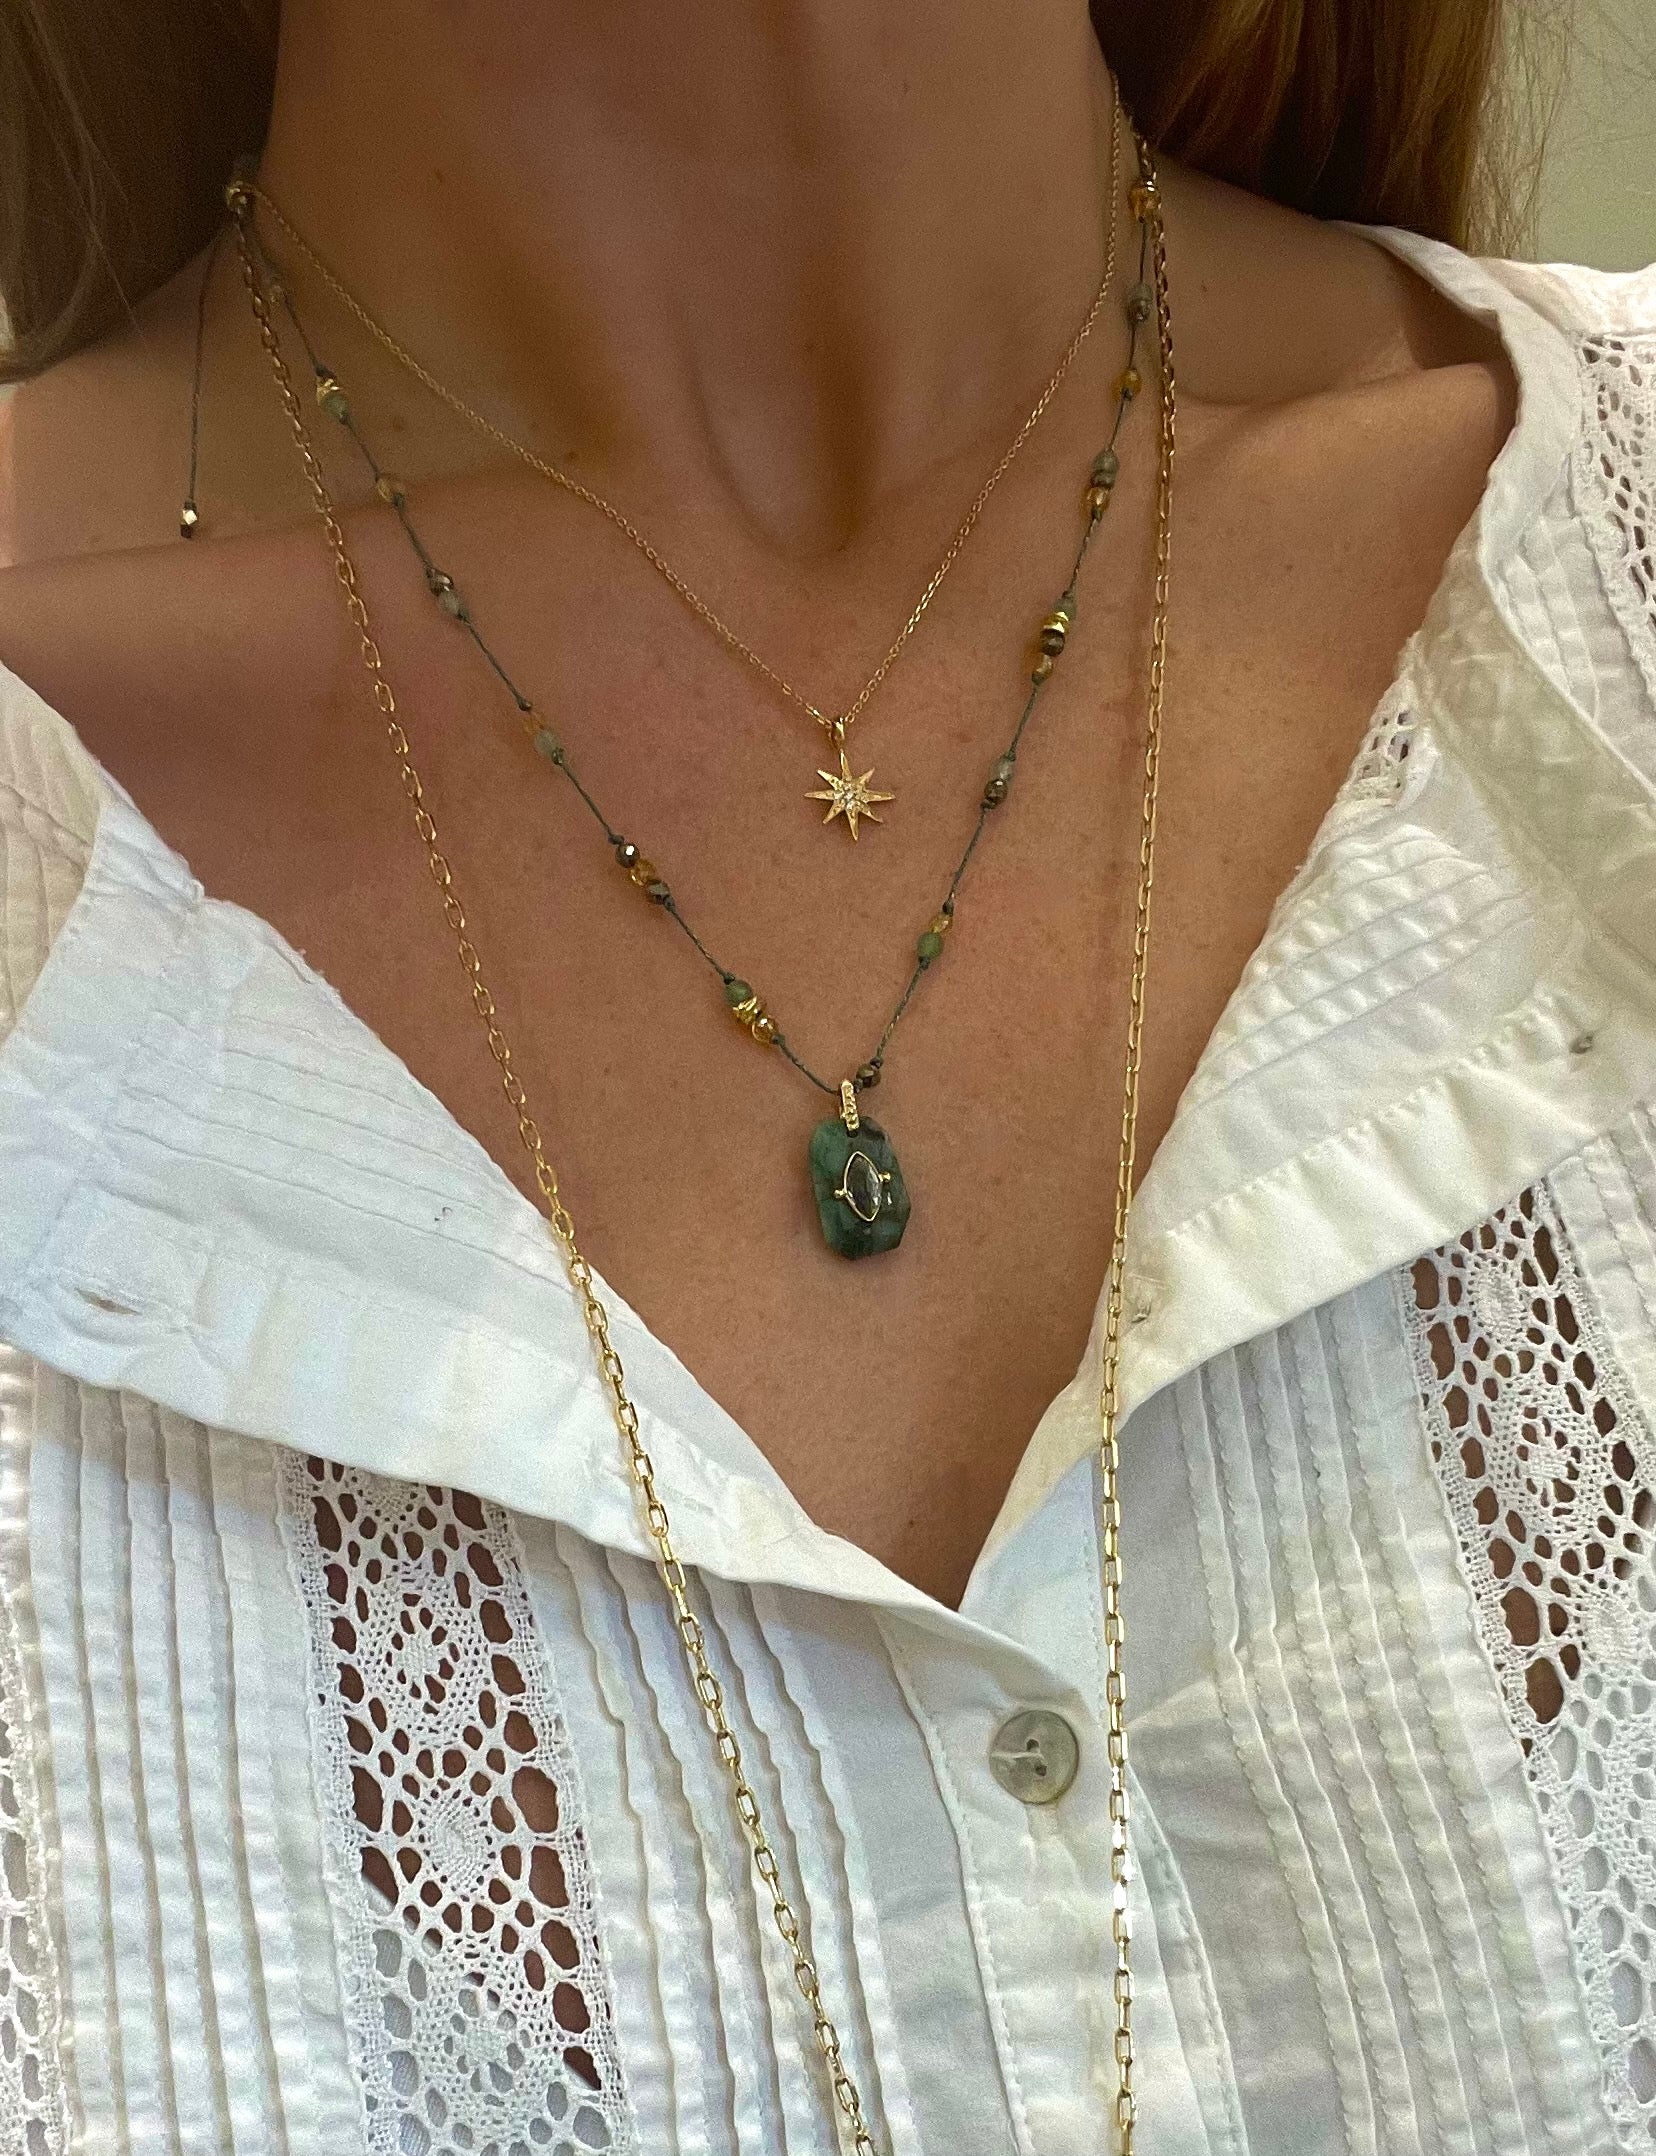 The Hope Necklace ↠ Star Medallion